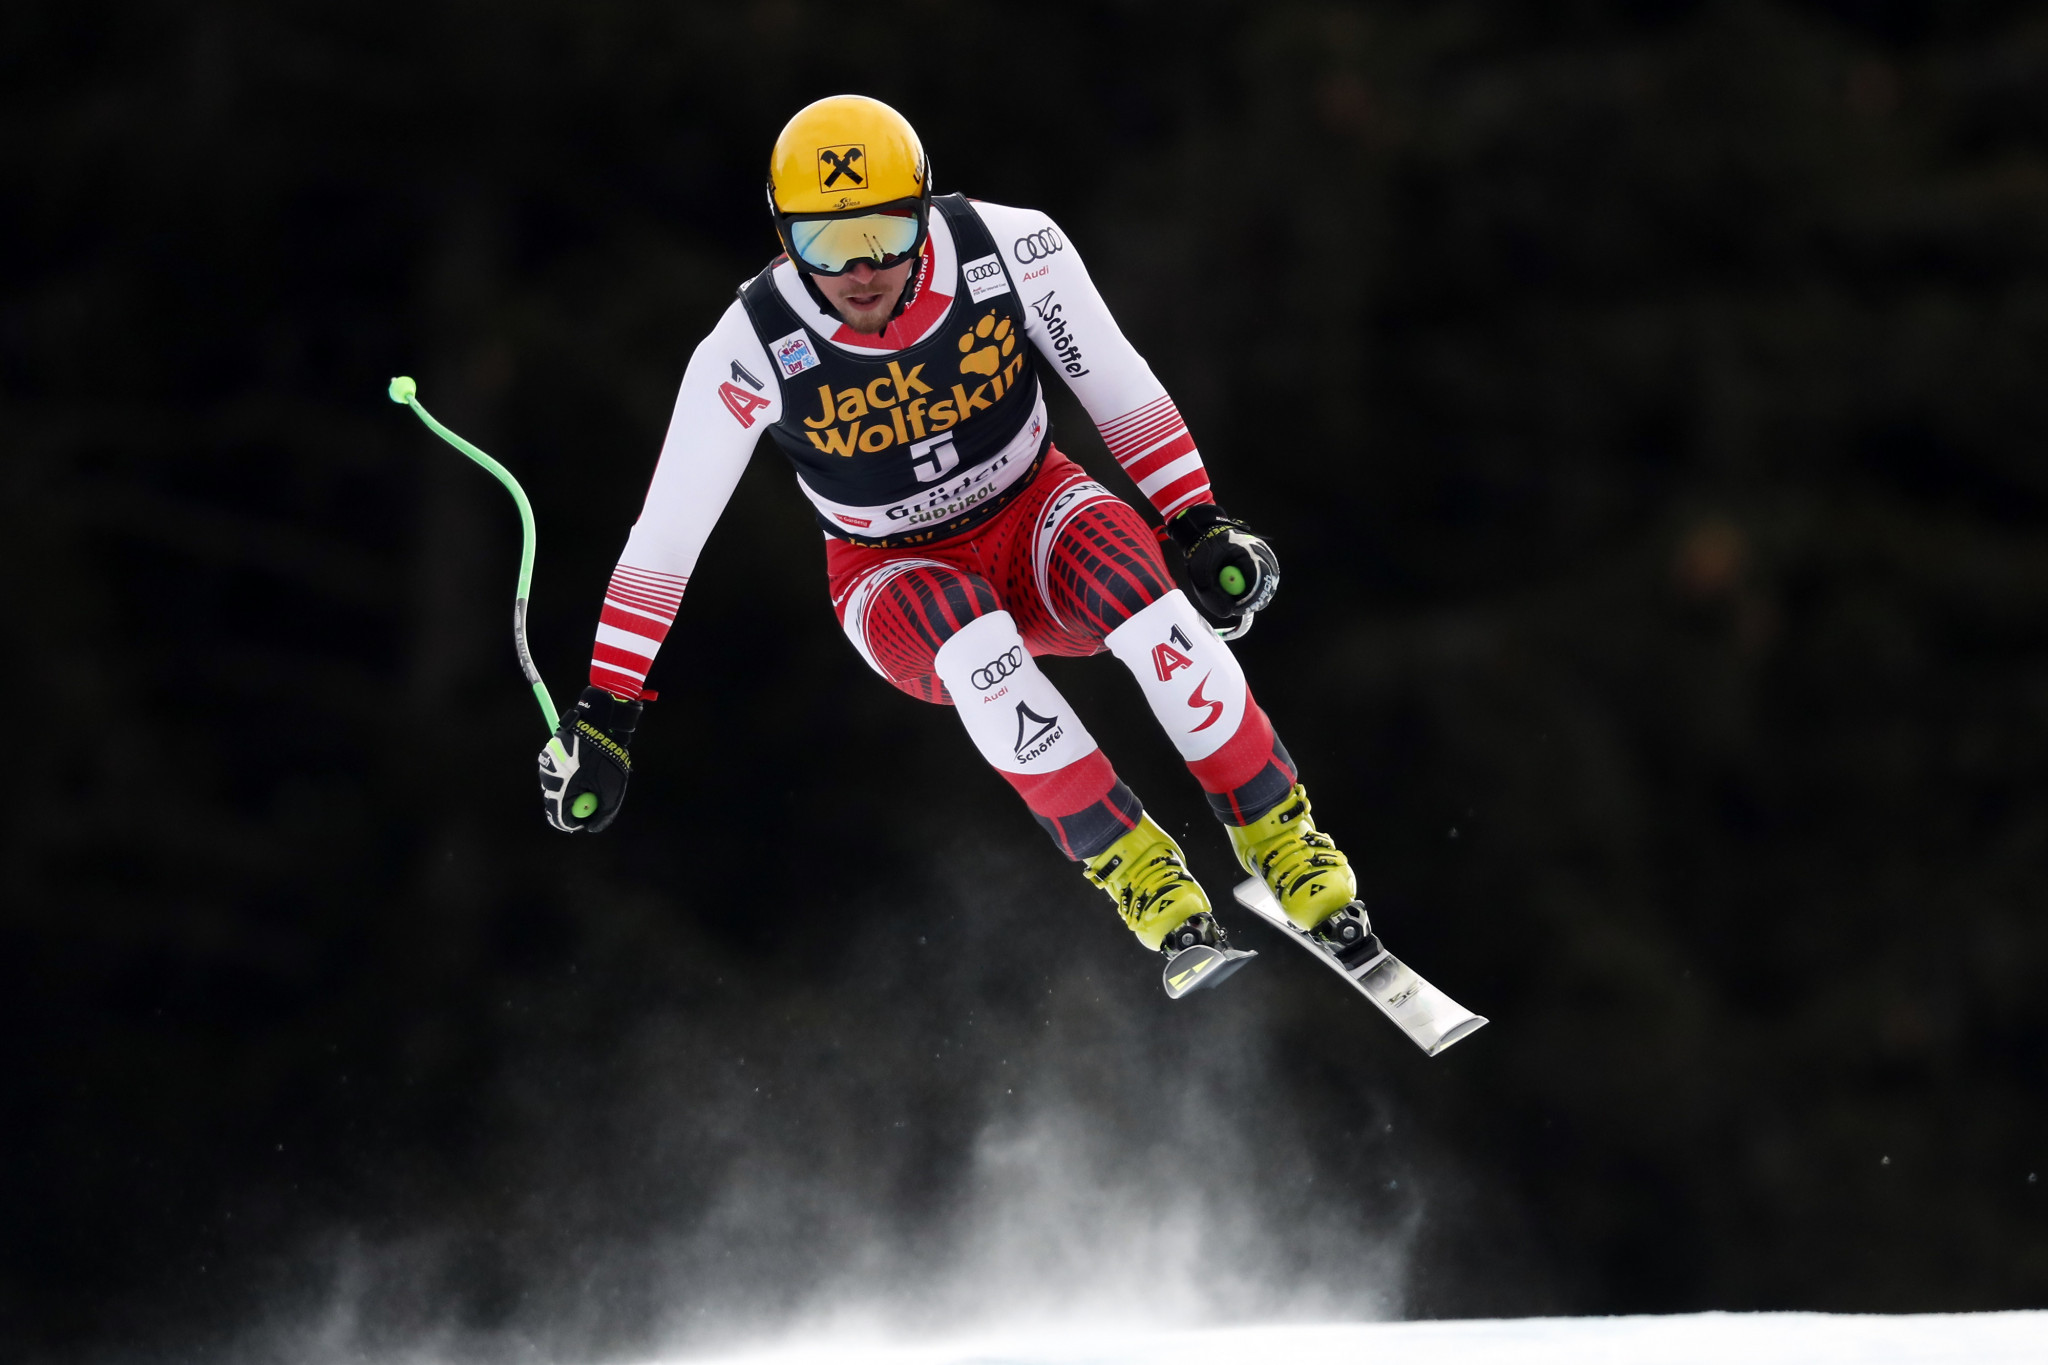 Franz out to continue strong start to FIS Alpine Skiing World Cup season